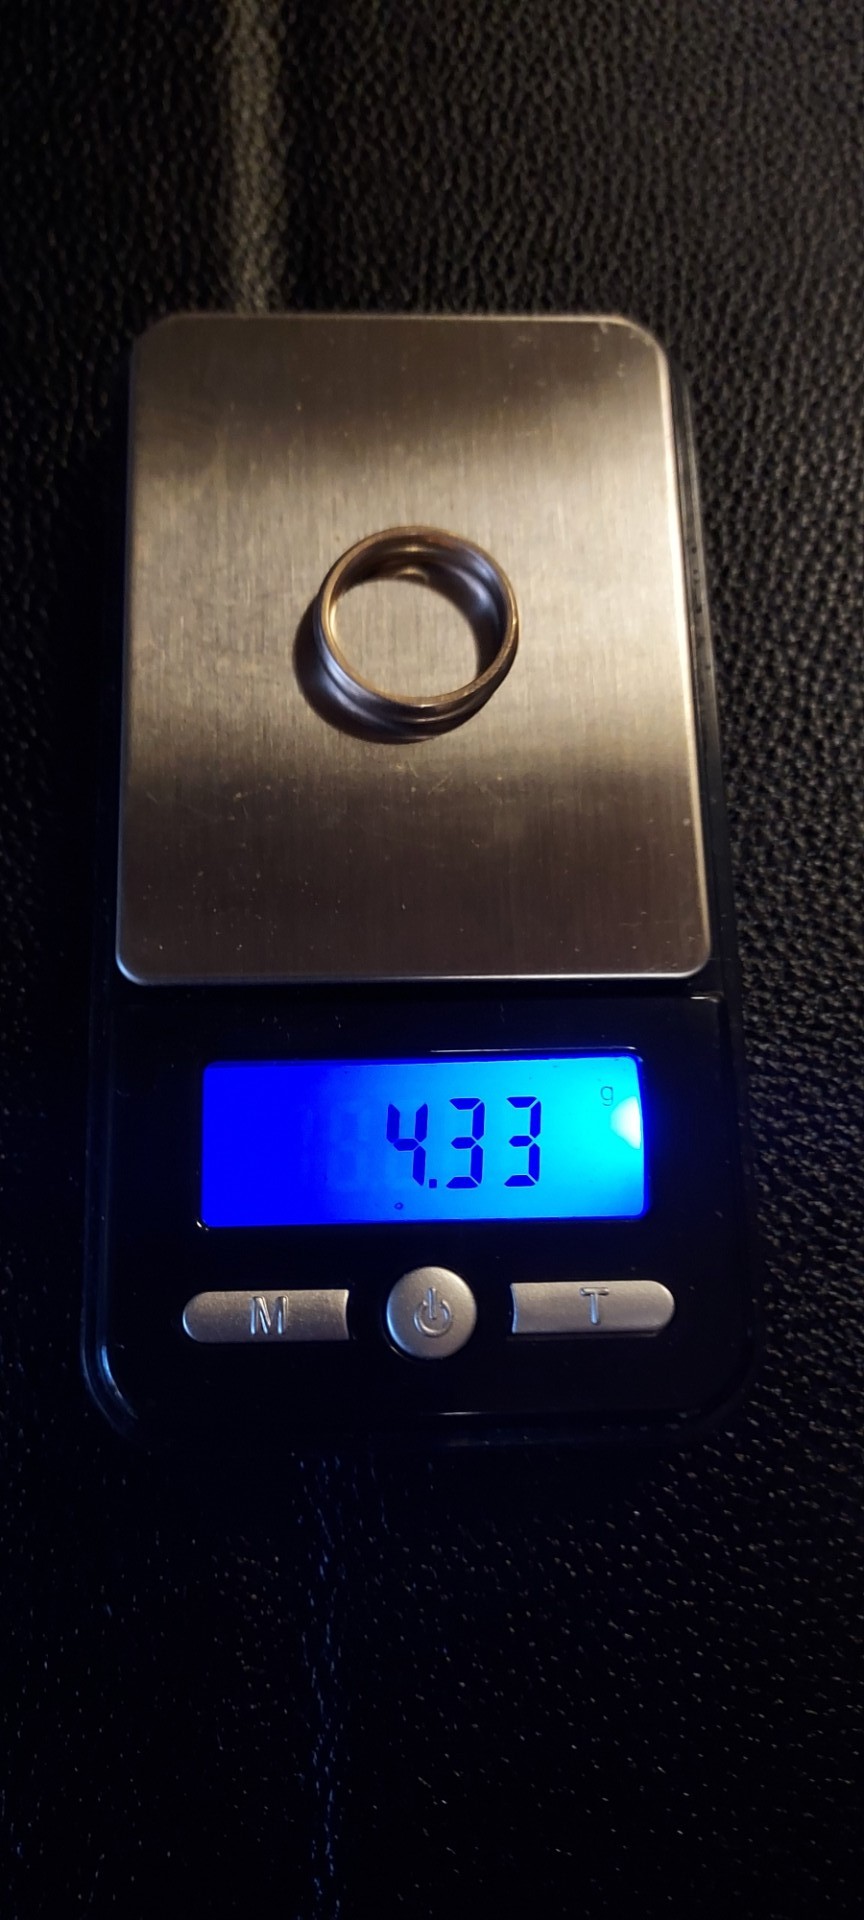 1st Gold... Finally! - Metal Detecting For Jewelry - DetectorProspector.com